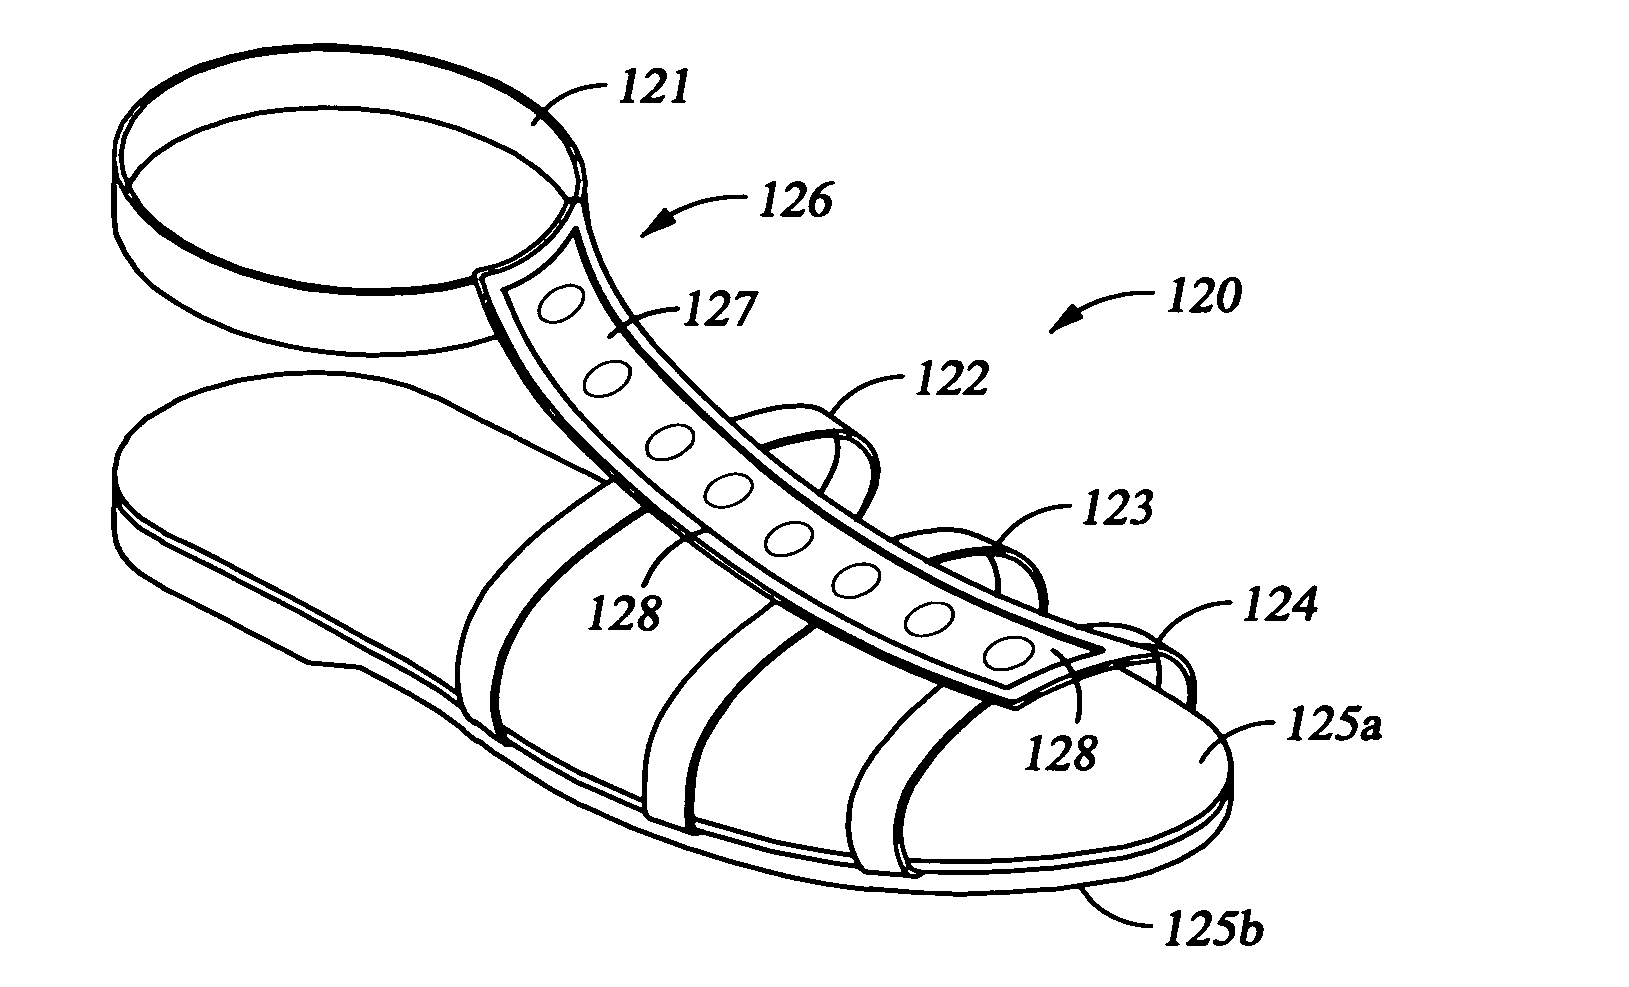 Shoes with a fashion design mounting base material for use with interchangeable fashion design attachments